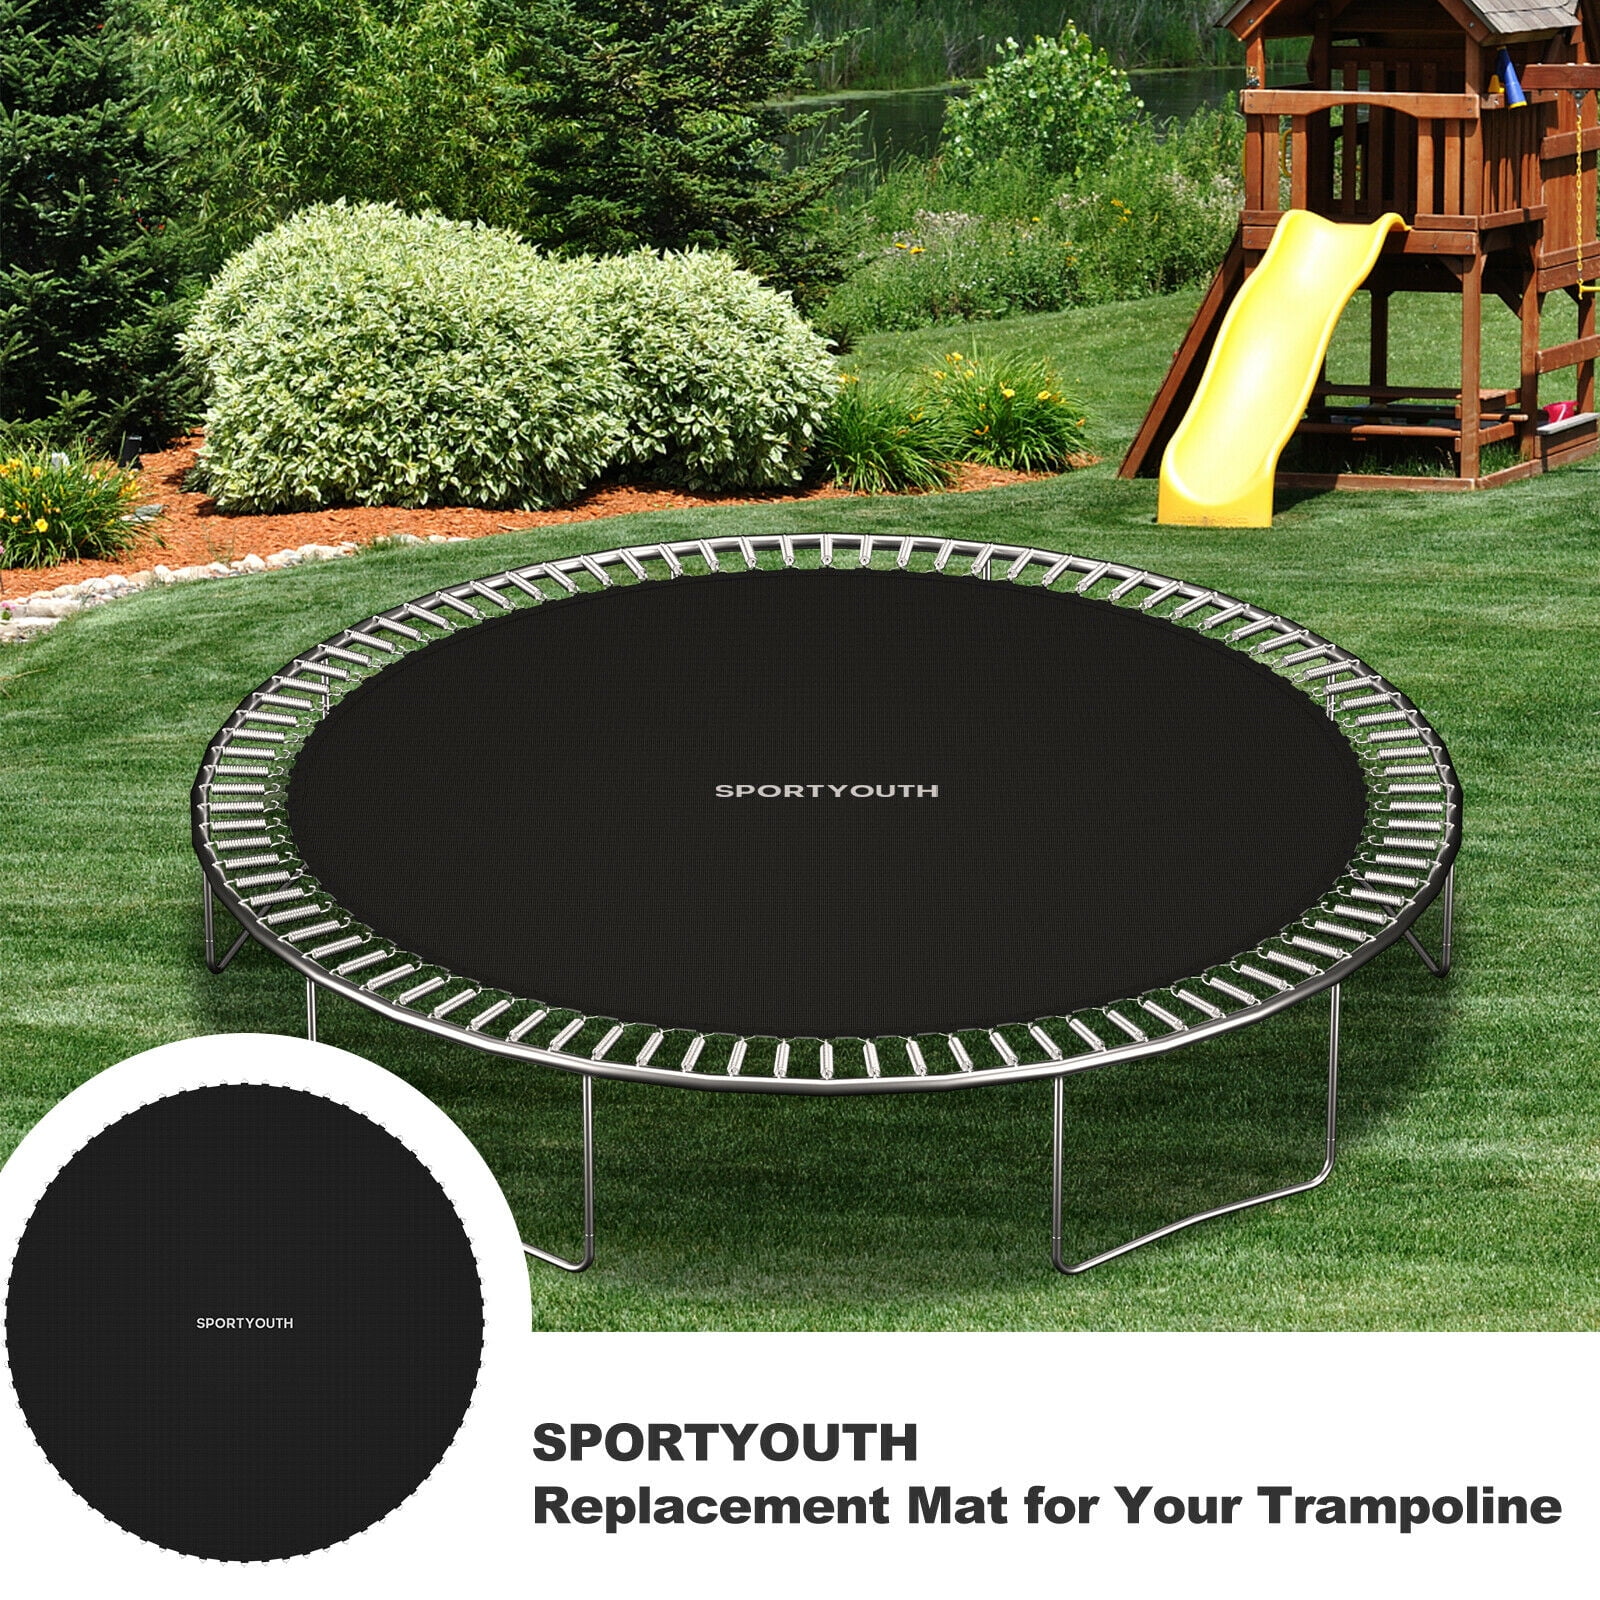 NEW RECTANGLE 14 x 8 Action TRAMPOLINE AUSSIE MADE 3Yr Wty Stitching Mat Only 